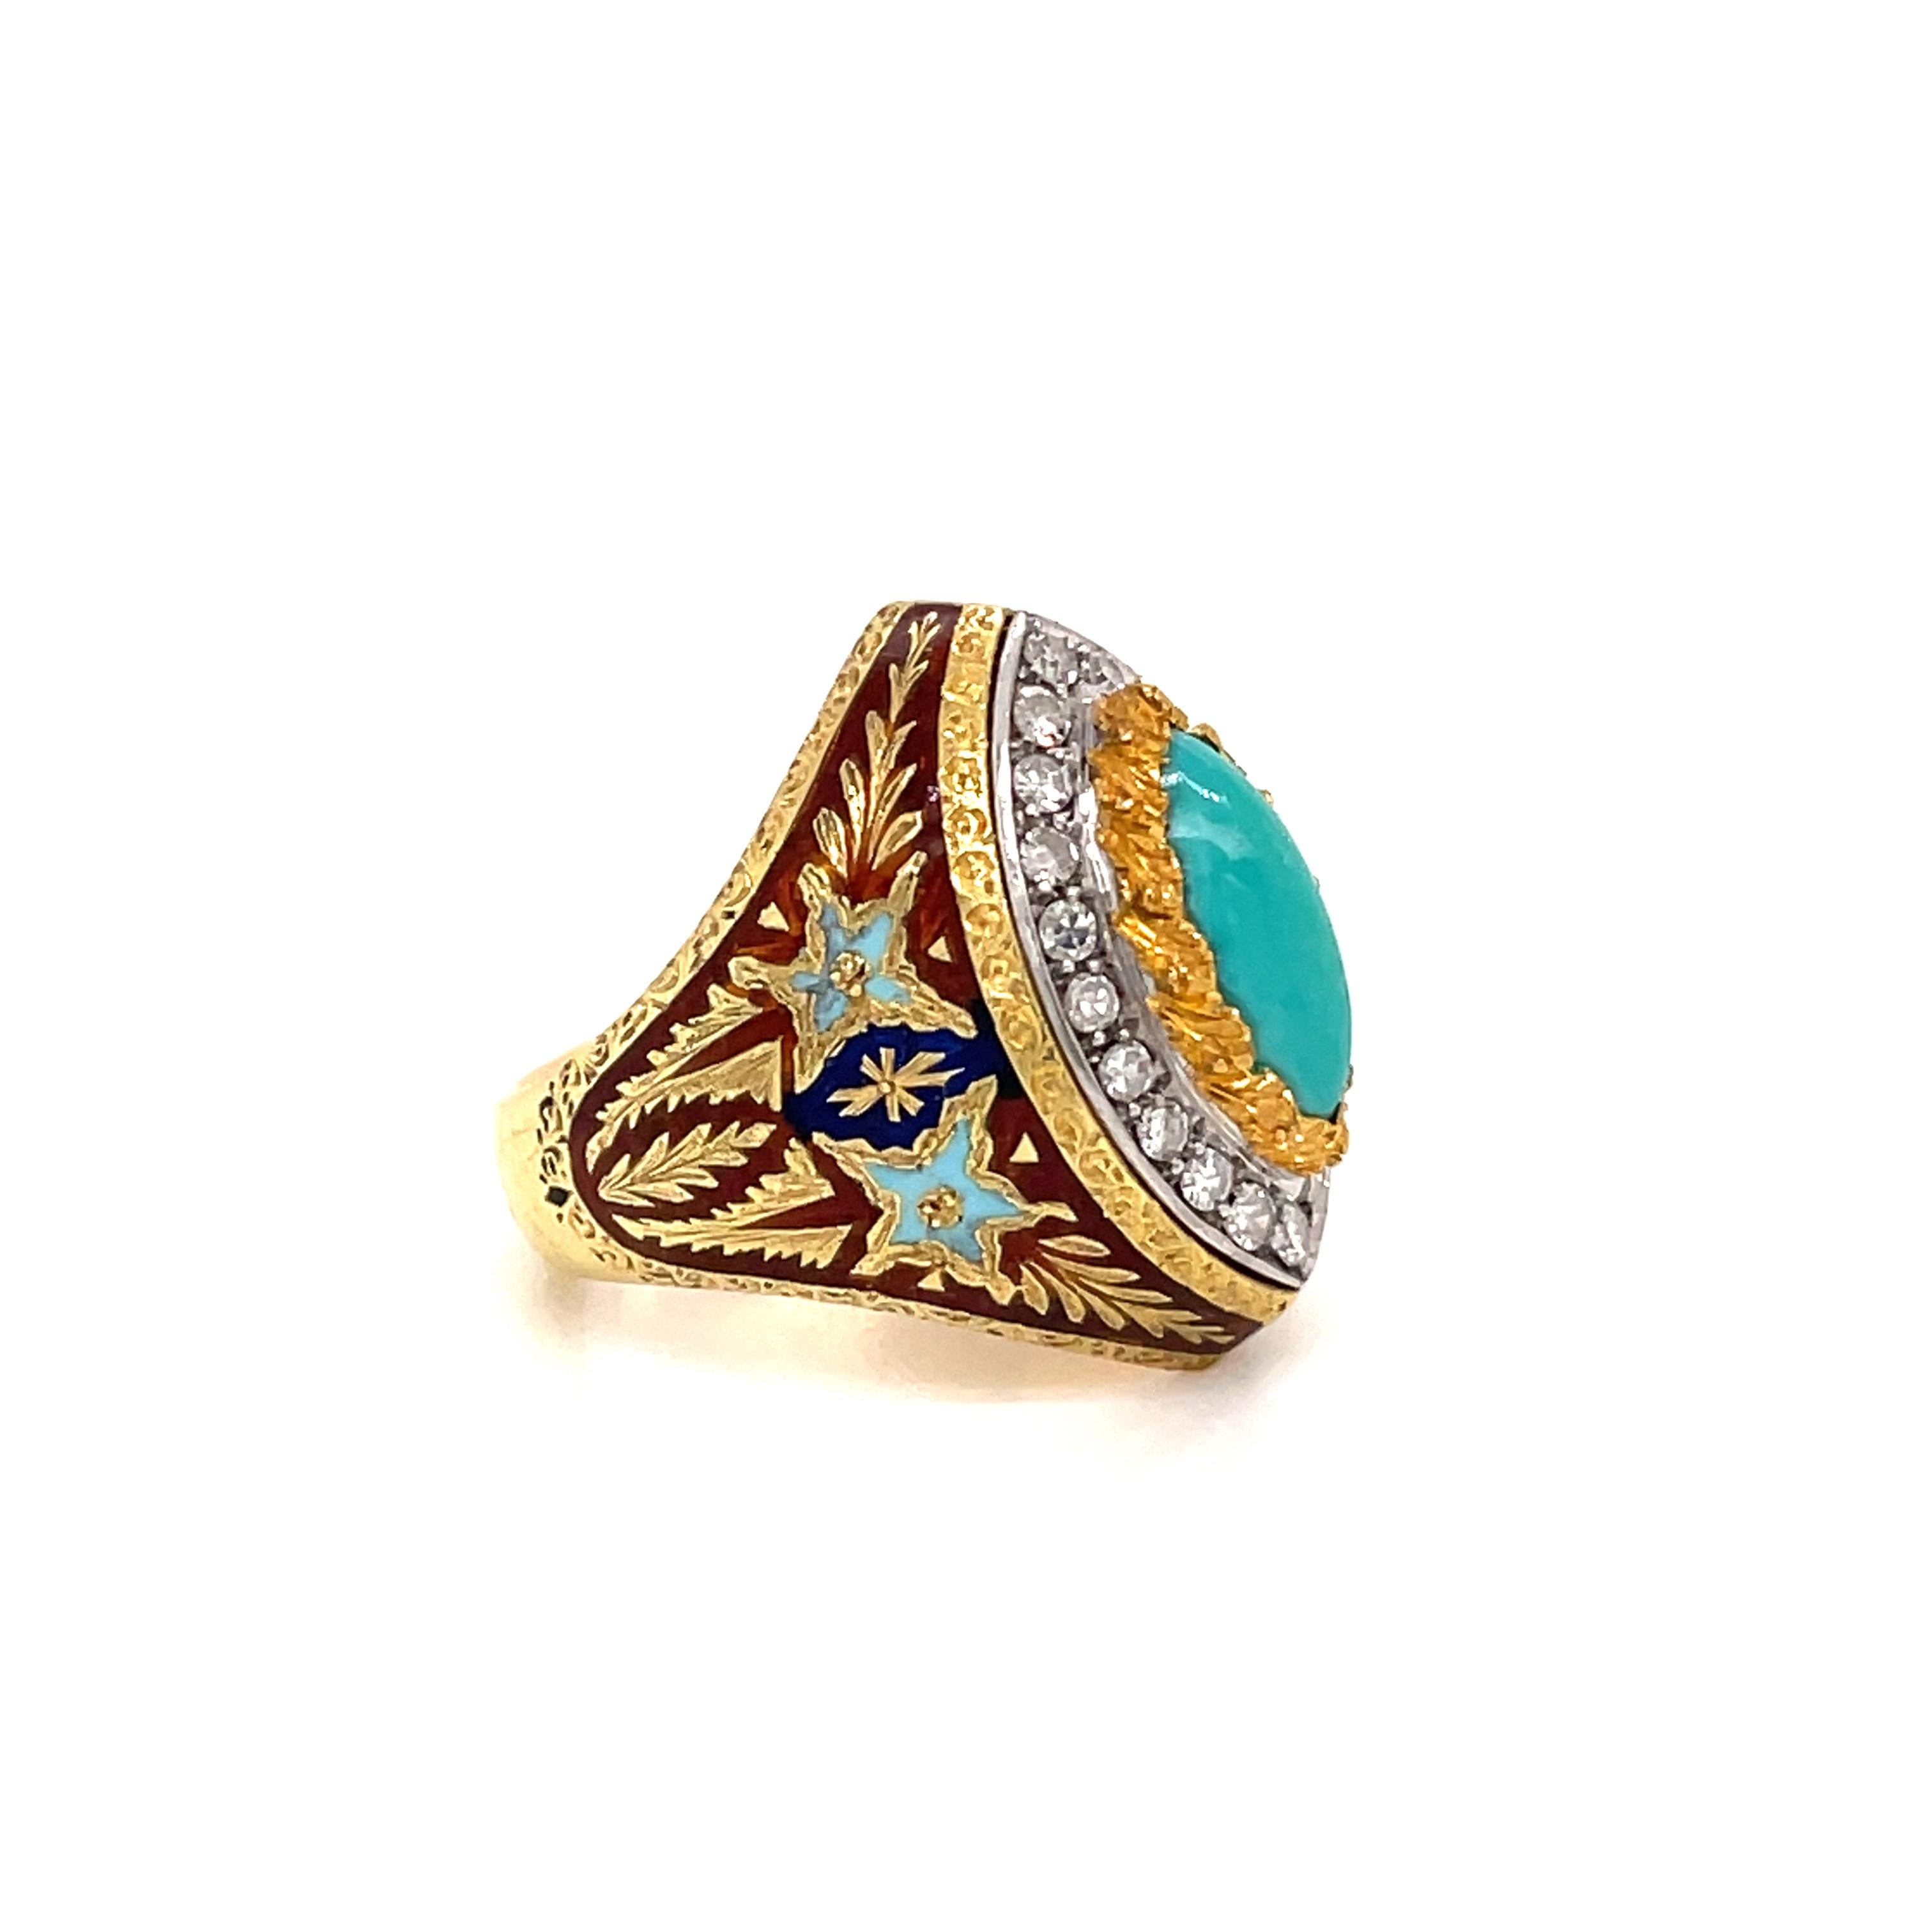 Cazzaniga Rome Diamond Turquoise Enamel Gold Engraved Ring In Excellent Condition For Sale In Napoli, Italy